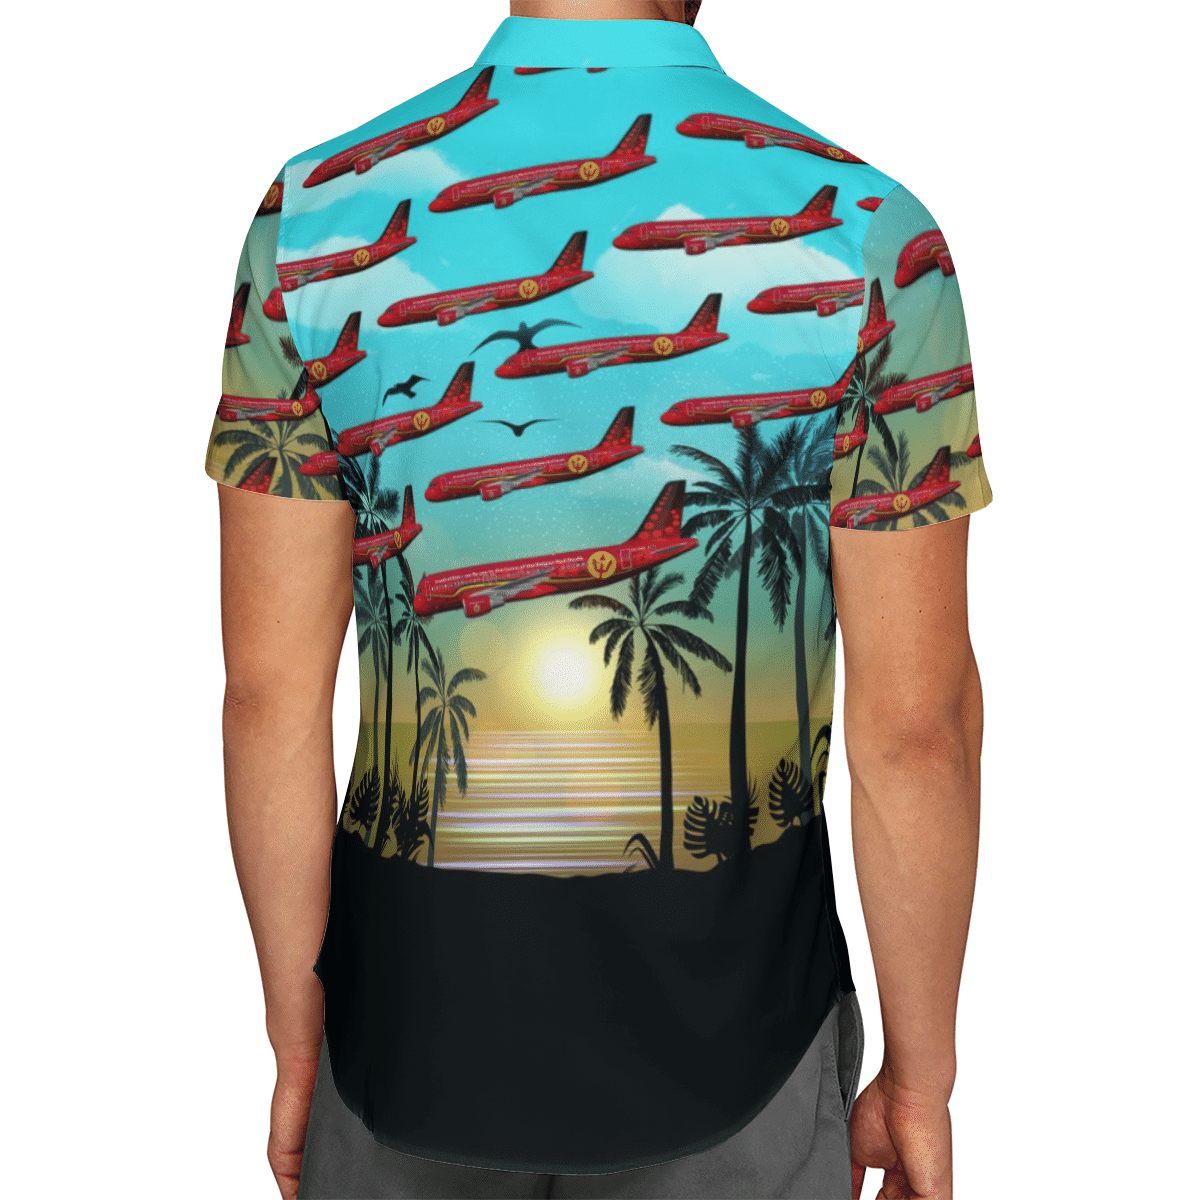 Going to the beach with a quality shirt 48